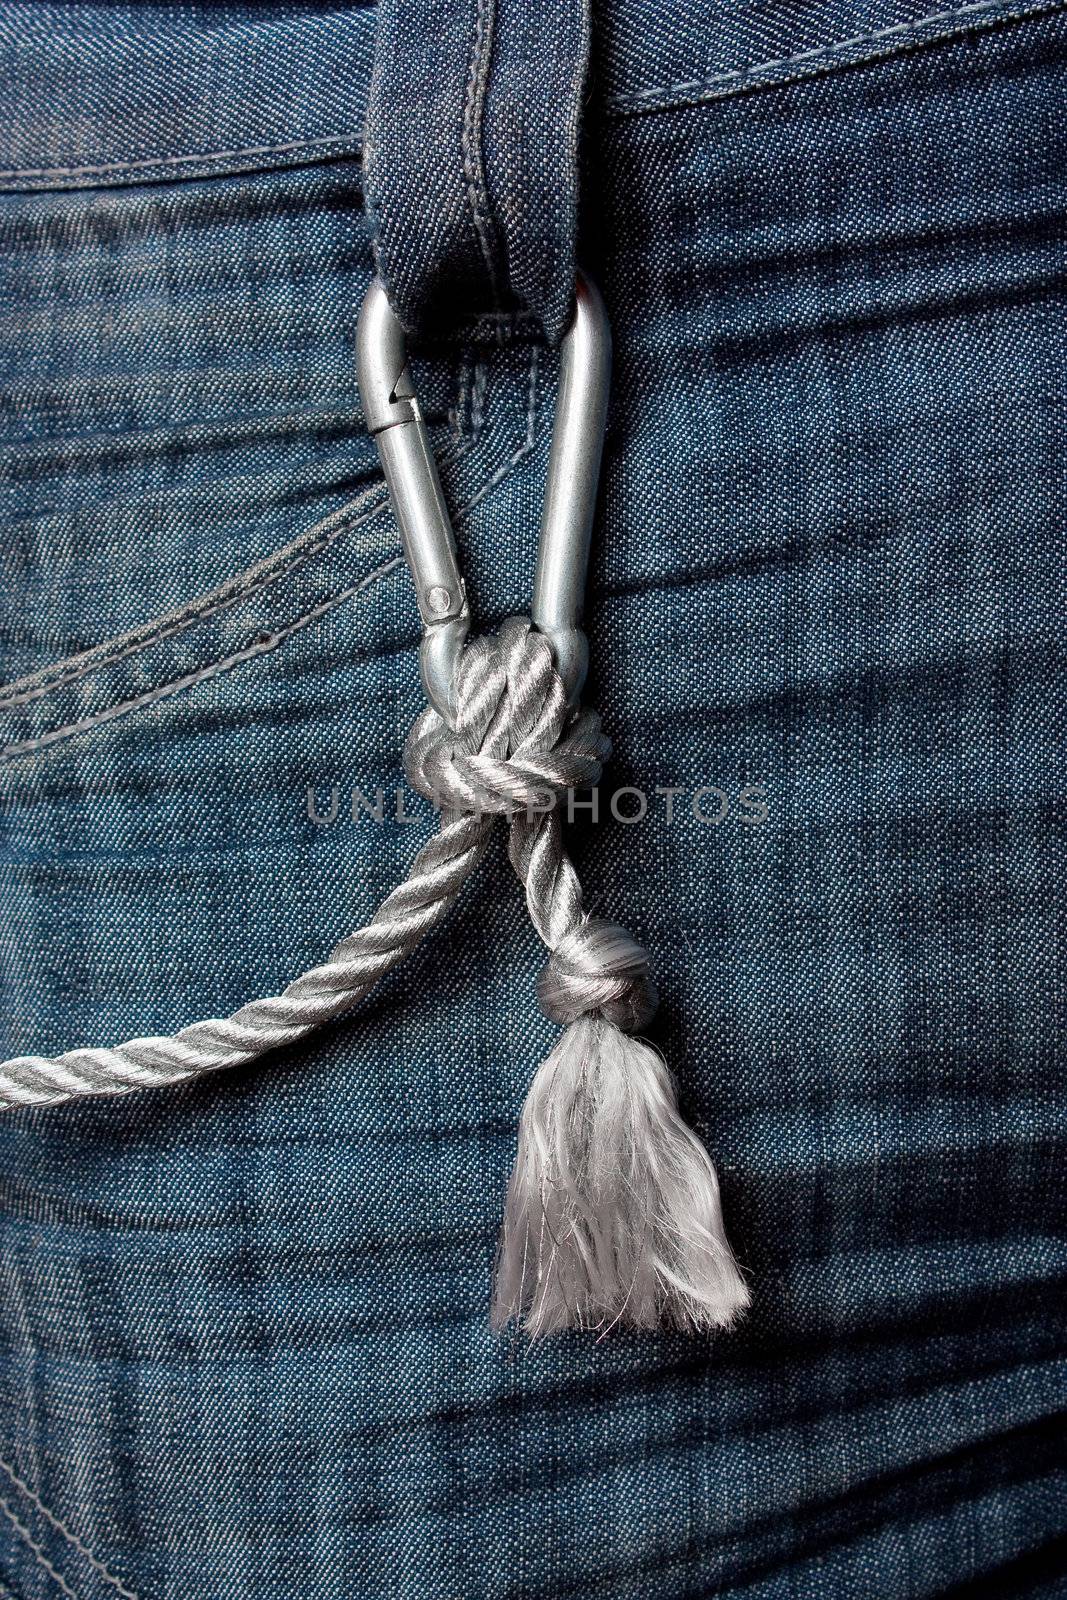 Carabiner with a rope fastened to the jeans by oleg_zhukov